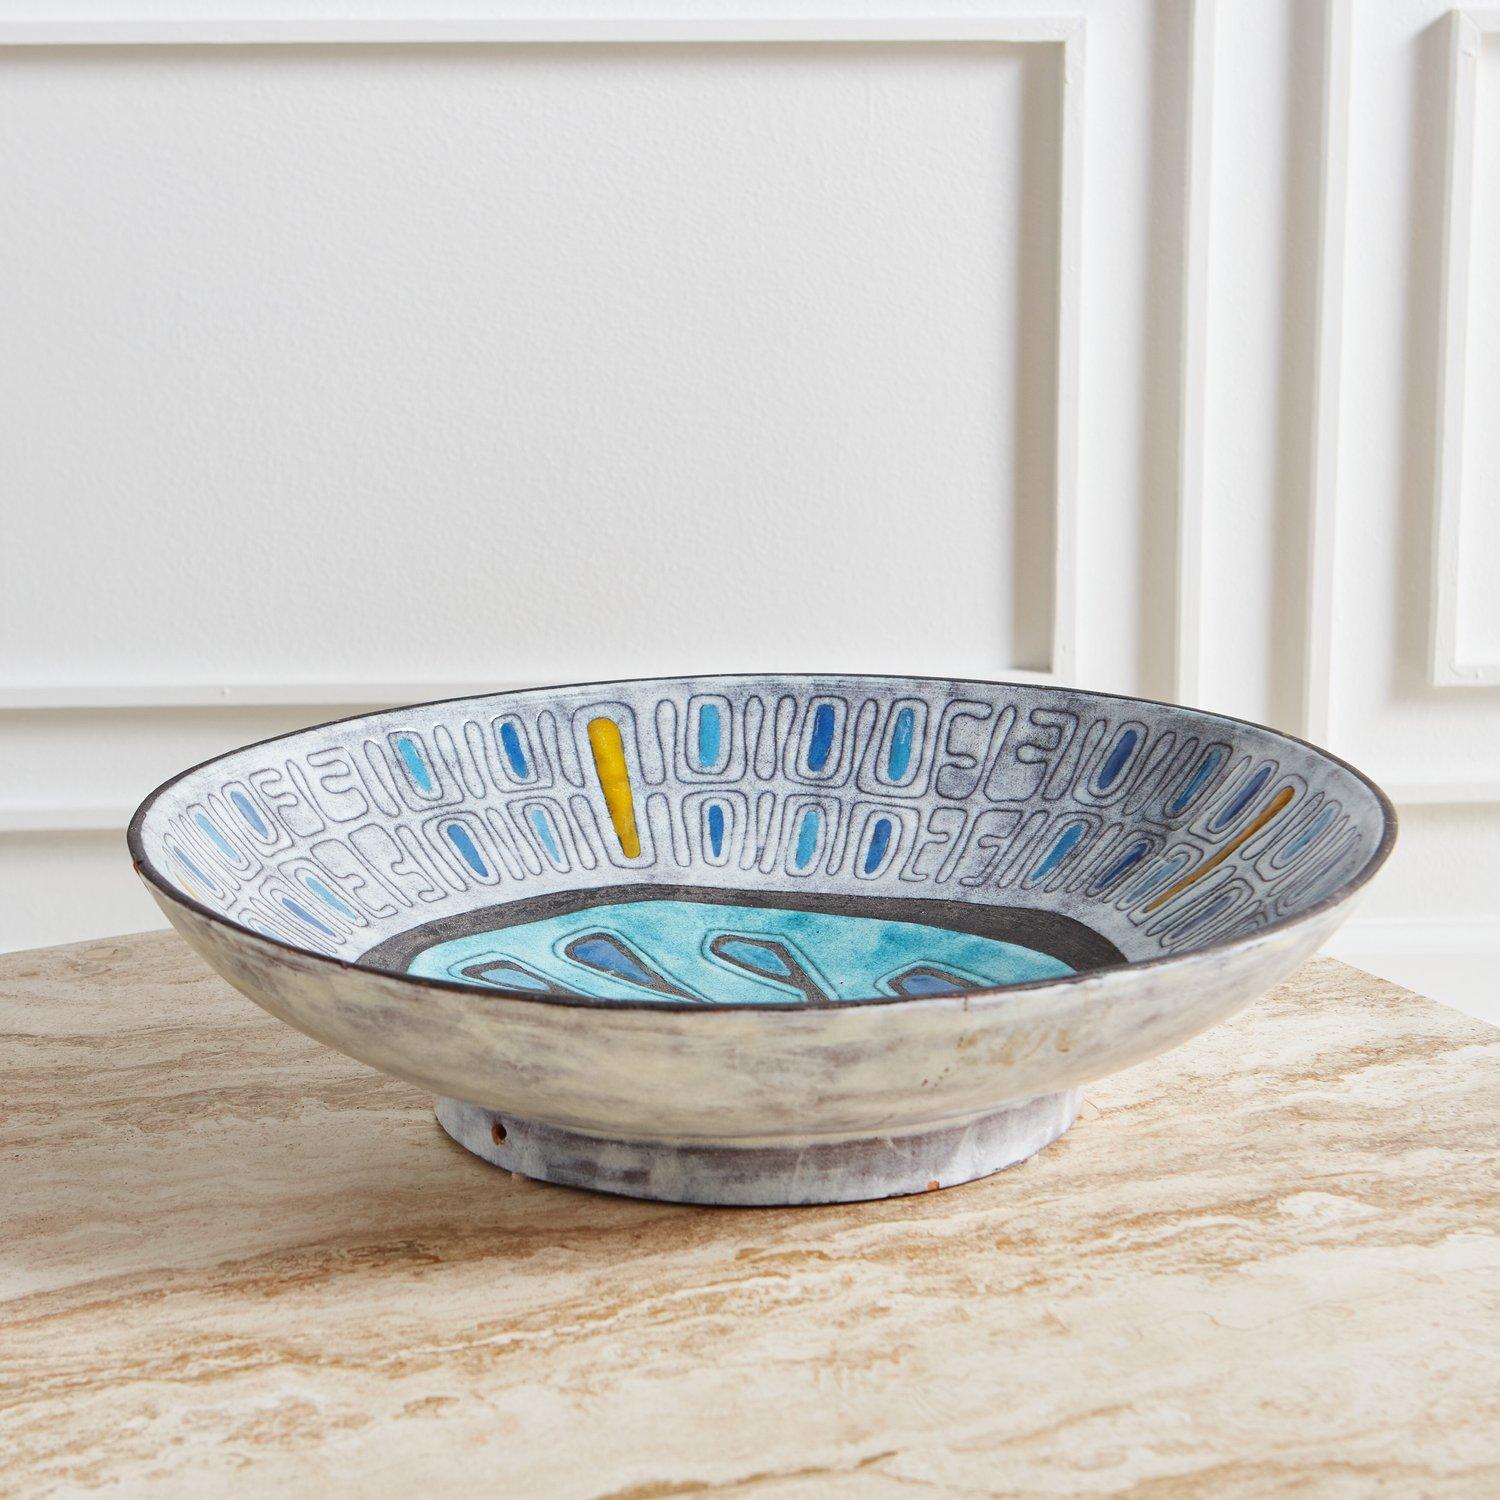 A textural oversized Mid Century glazed Ceramic bowl featuring a primitive design and vibrant blue and yellow hues. Marked S227 on underside. This bowl can sit on a table top or hang on the wall. Hanging hardware not included.